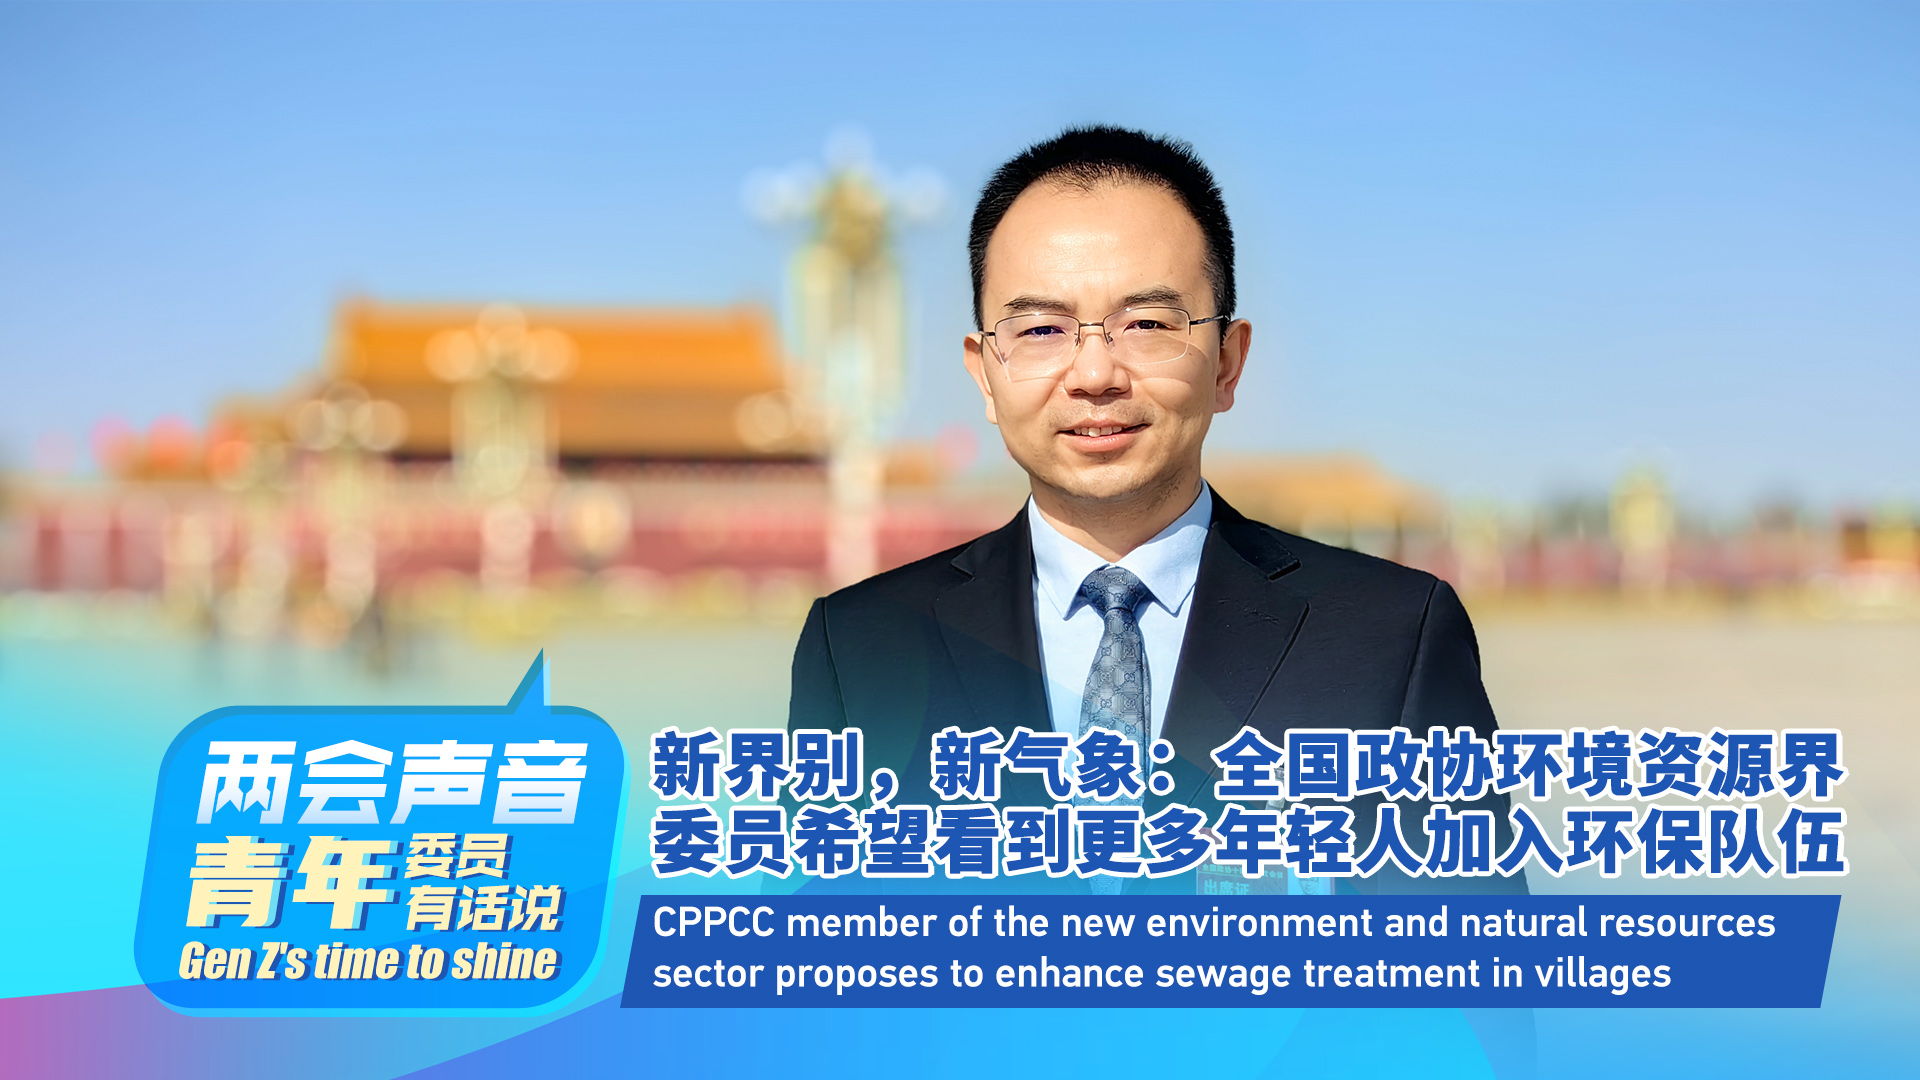 CPPCC member proposes to enhance sewage treatment in villages